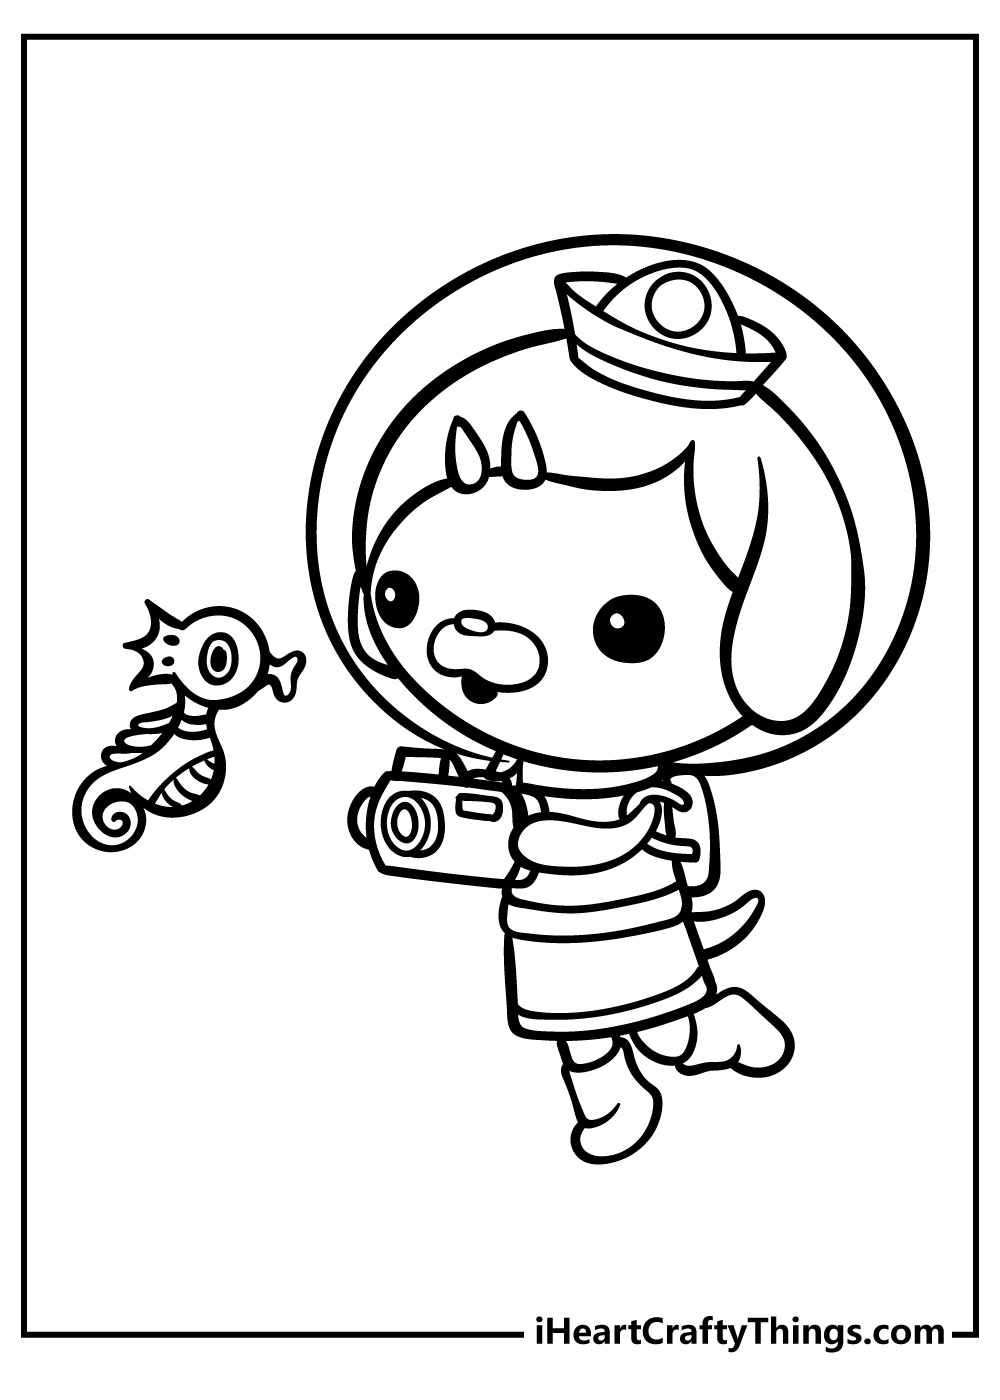 Octonauts Coloring Pages Book for adults free download